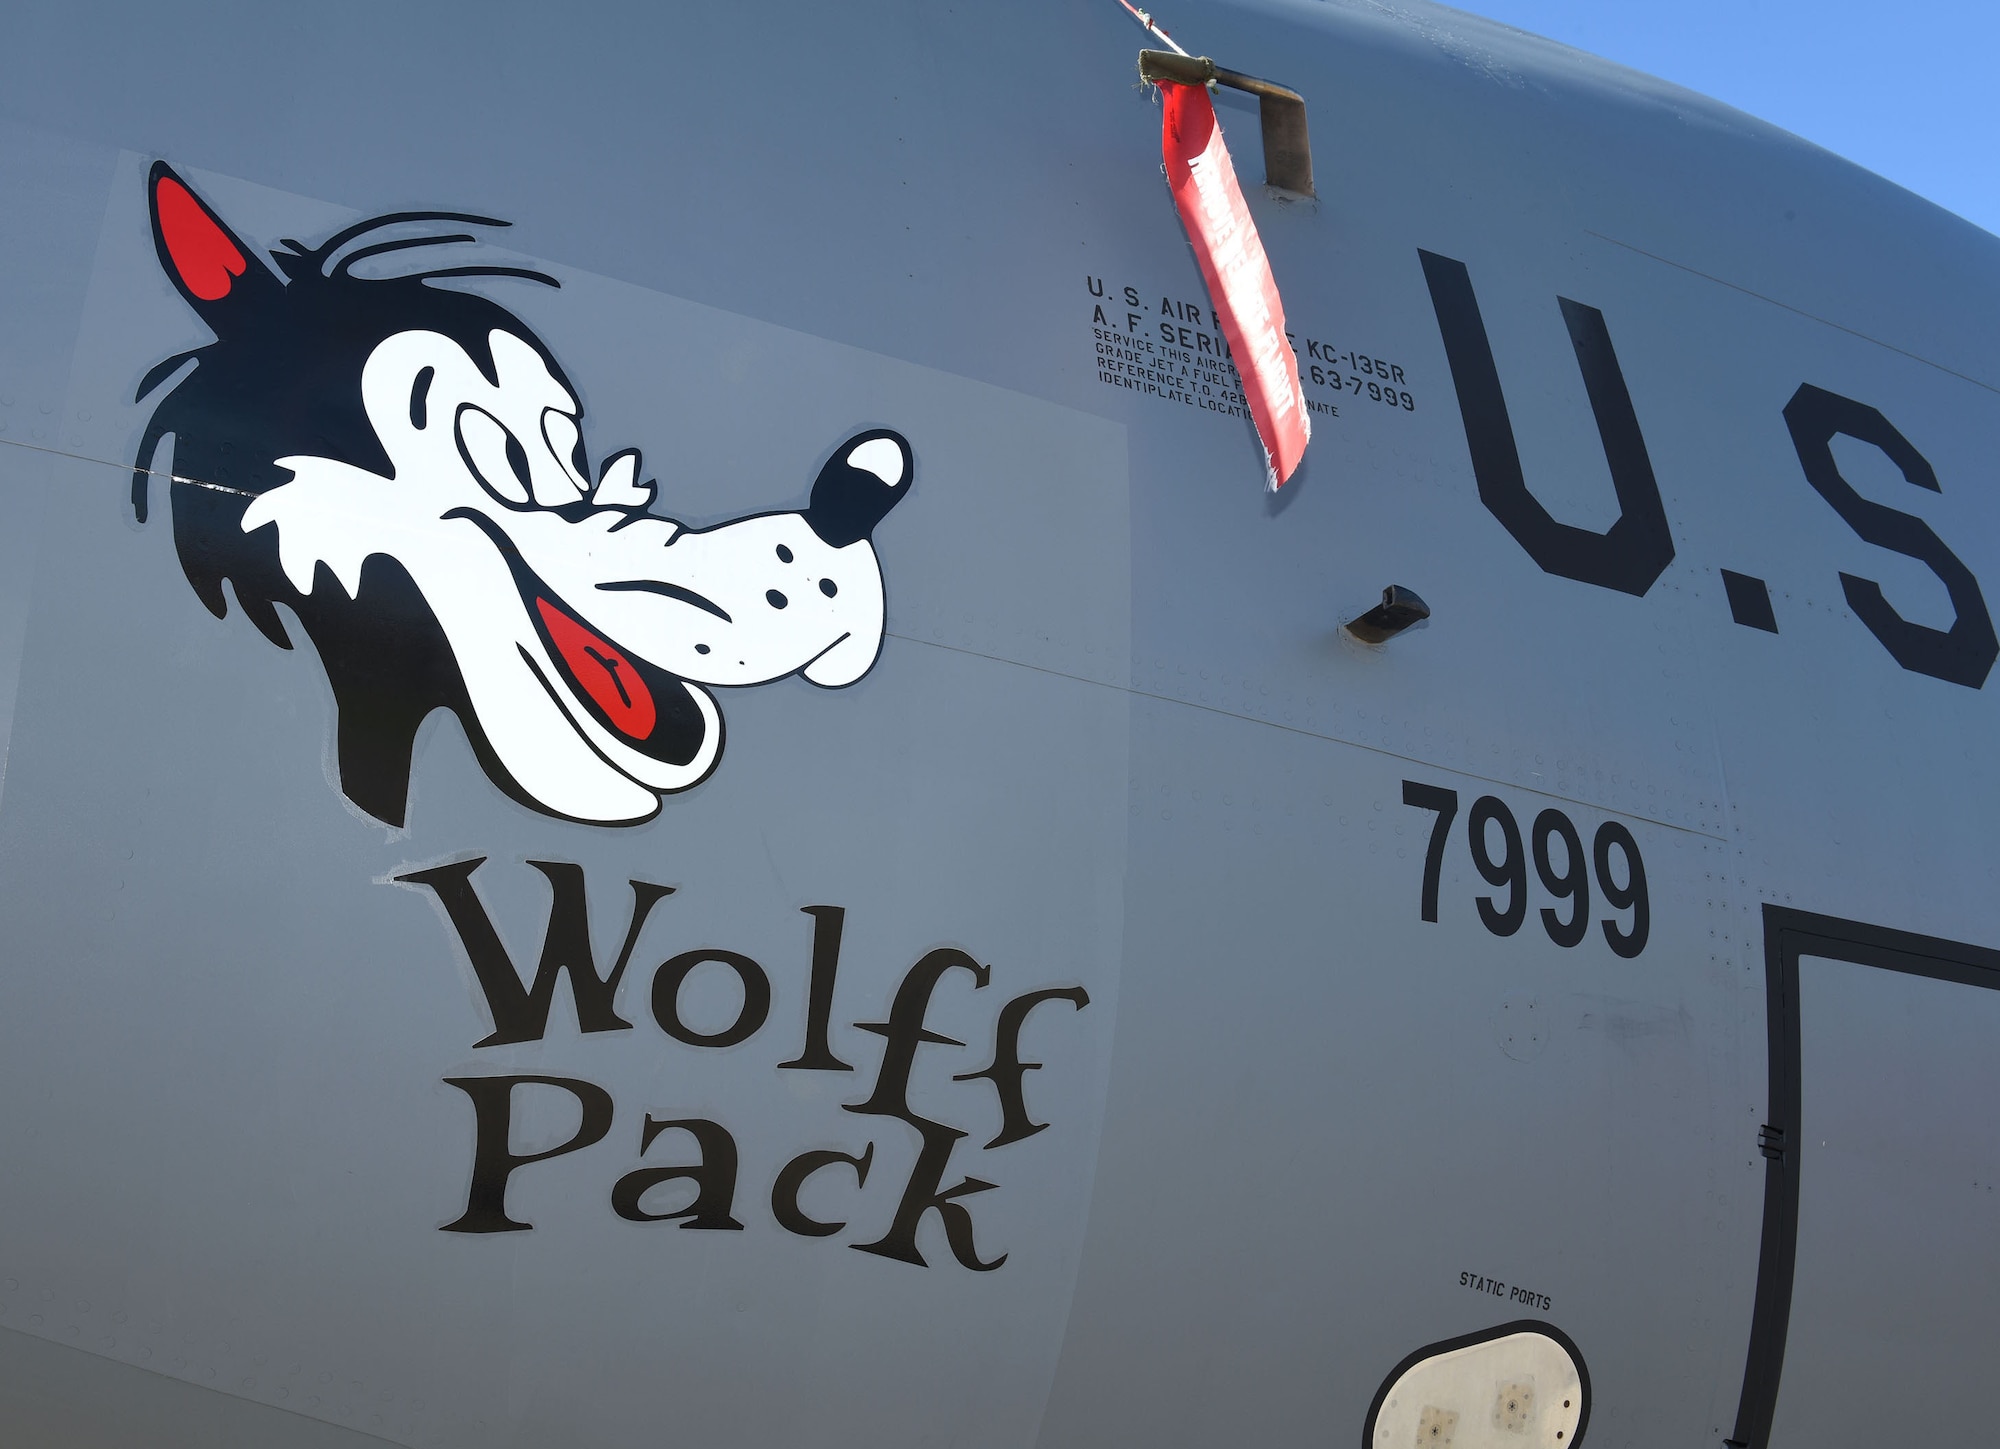 Heritage nose art “Wolff Pack” is displayed on one of the 100th Air Refueling Wing’s KC-135 Stratotanker aircraft at Royal Air Force Mildenhall Feb. 26, 2021. The nose art is based on World War II designs of the 100th Bomb Group, based at Thorpe Abbotts, Diss, England. Captain (ret.) Robert “Bob” Wolff was a B-17 Flying fortress pilot with the 418th Bomb Squadron, 100th BG, who flew seven combat missions out of Thorpe Abbotts. The KC-135 nose art was dedicated to Wolff in May 2021, on the 67th anniversary of Victory in Europe Day. (U.S. Air Force photo by Karen Abeyasekere)